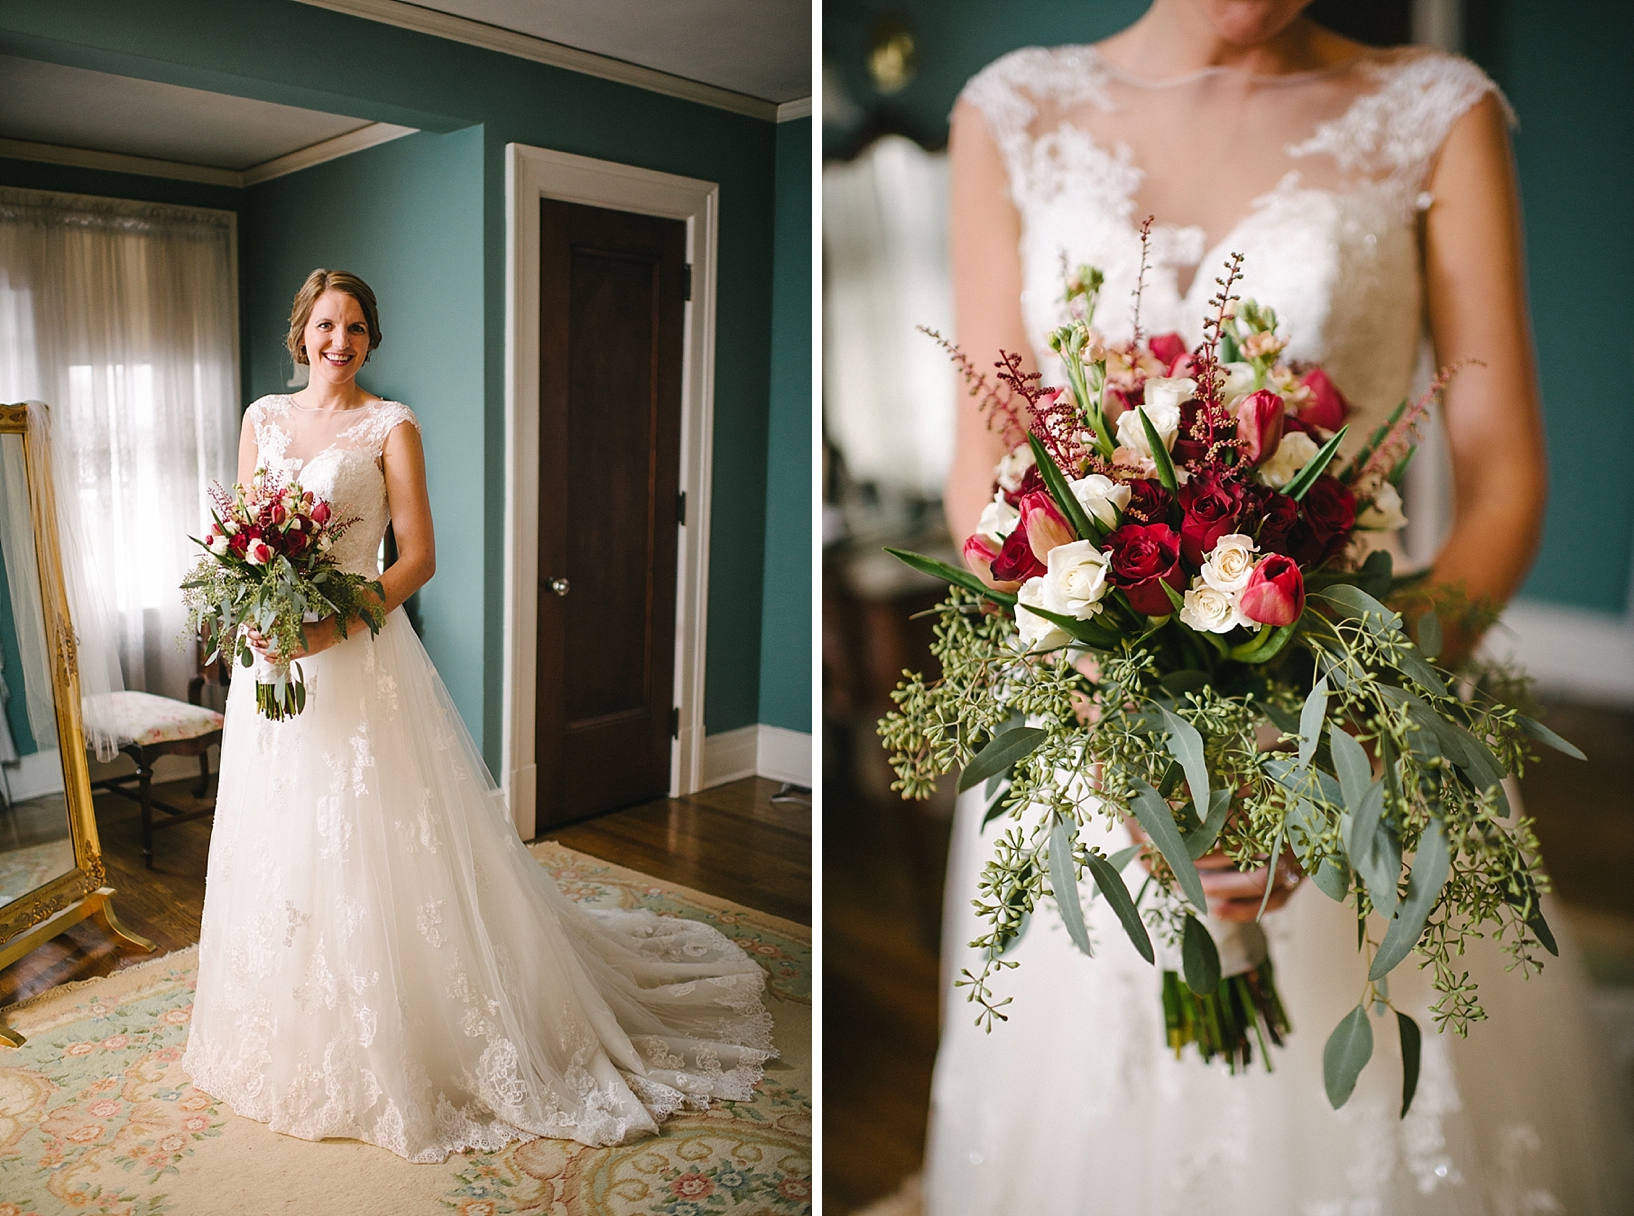 bride in lace wedding gown standing in bedroom holding bridal bouquet with red roses